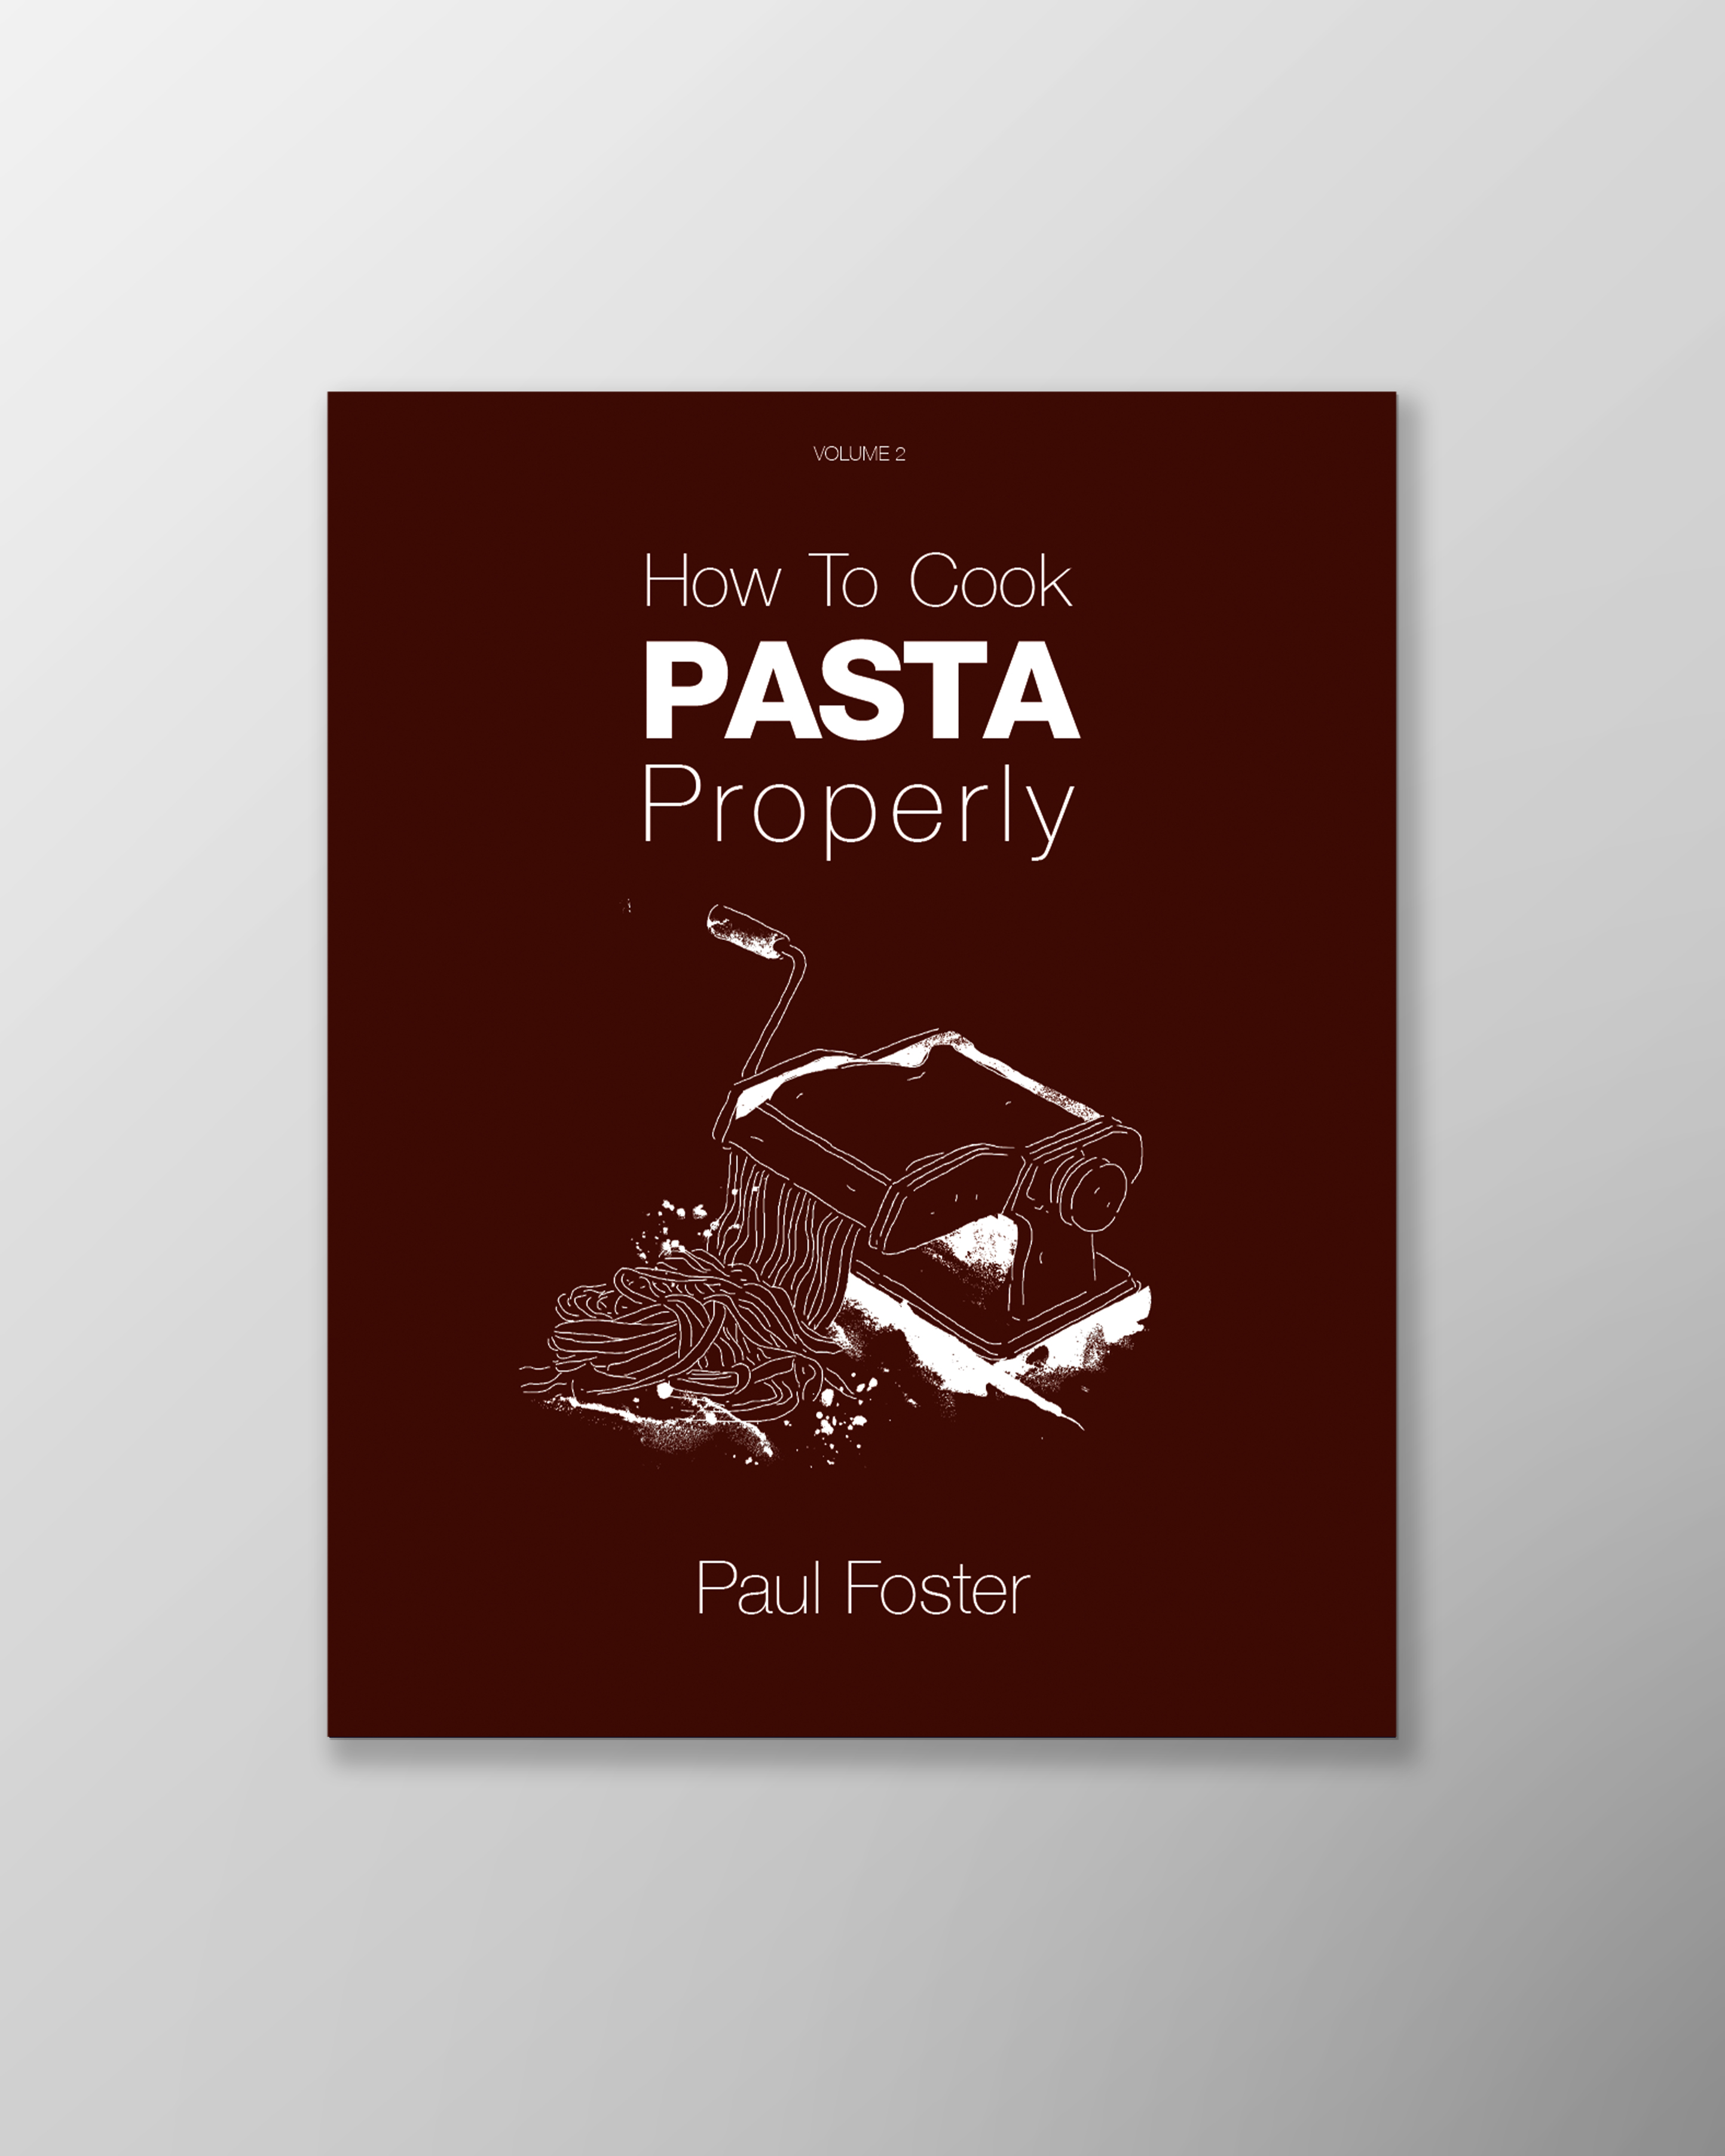 How To Cook Pasta Properly by Paul Foster